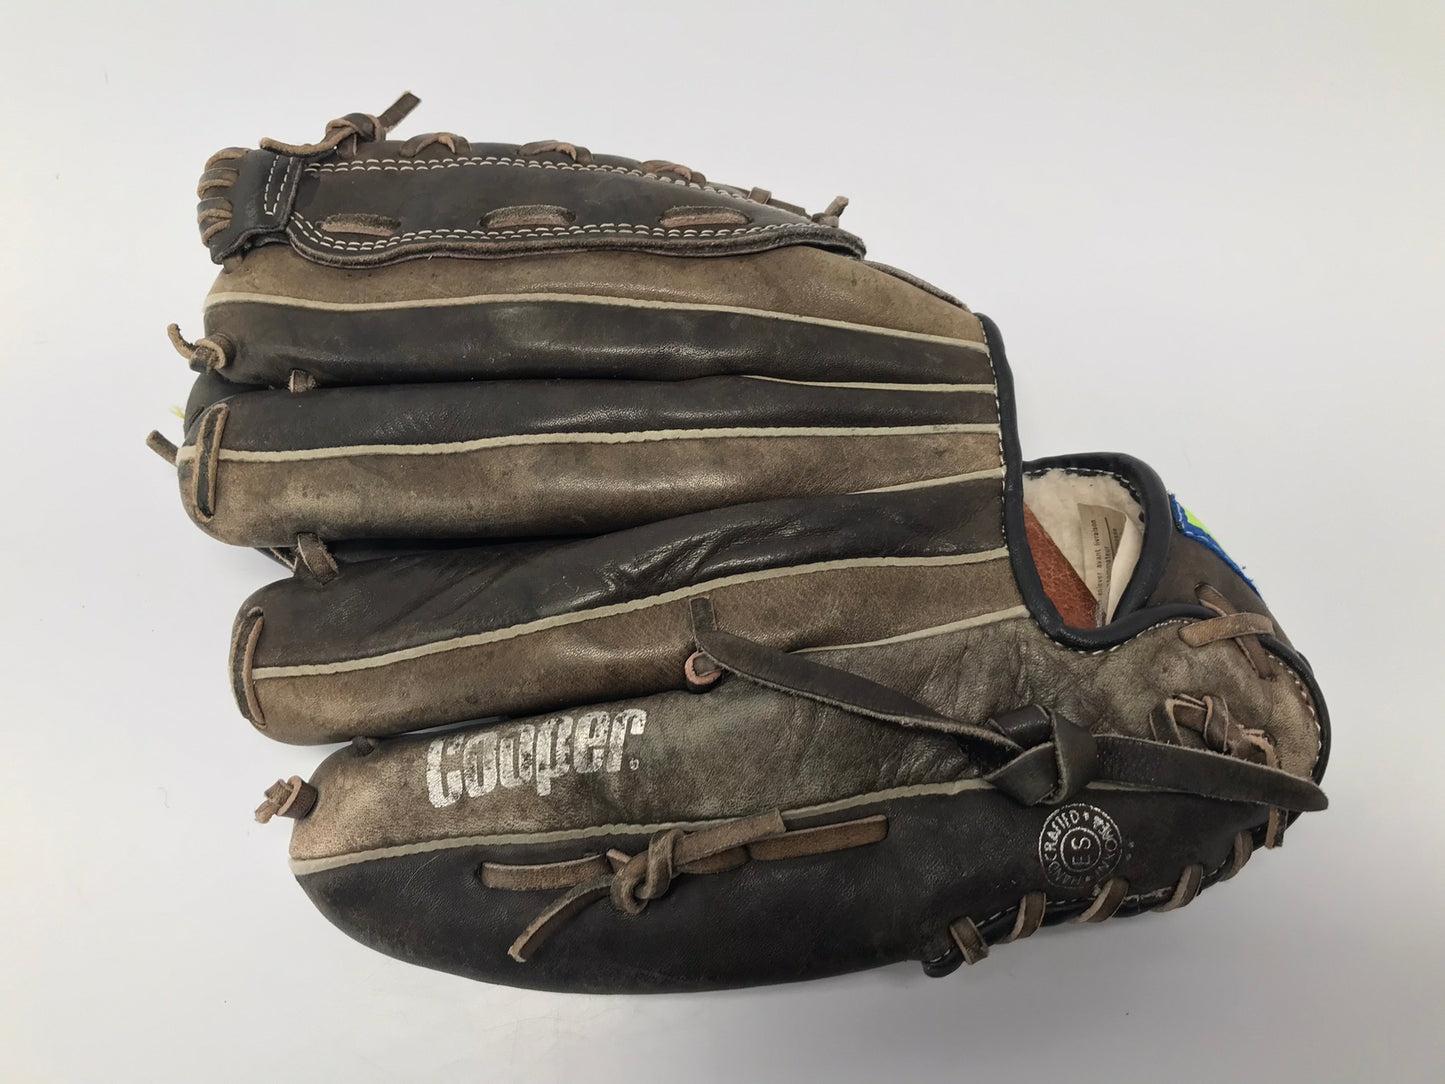 Baseball Glove Adult Size 12.5 Cooper Black Diamond Leather Lime Brown Fits Left Hand Outstanding Quality